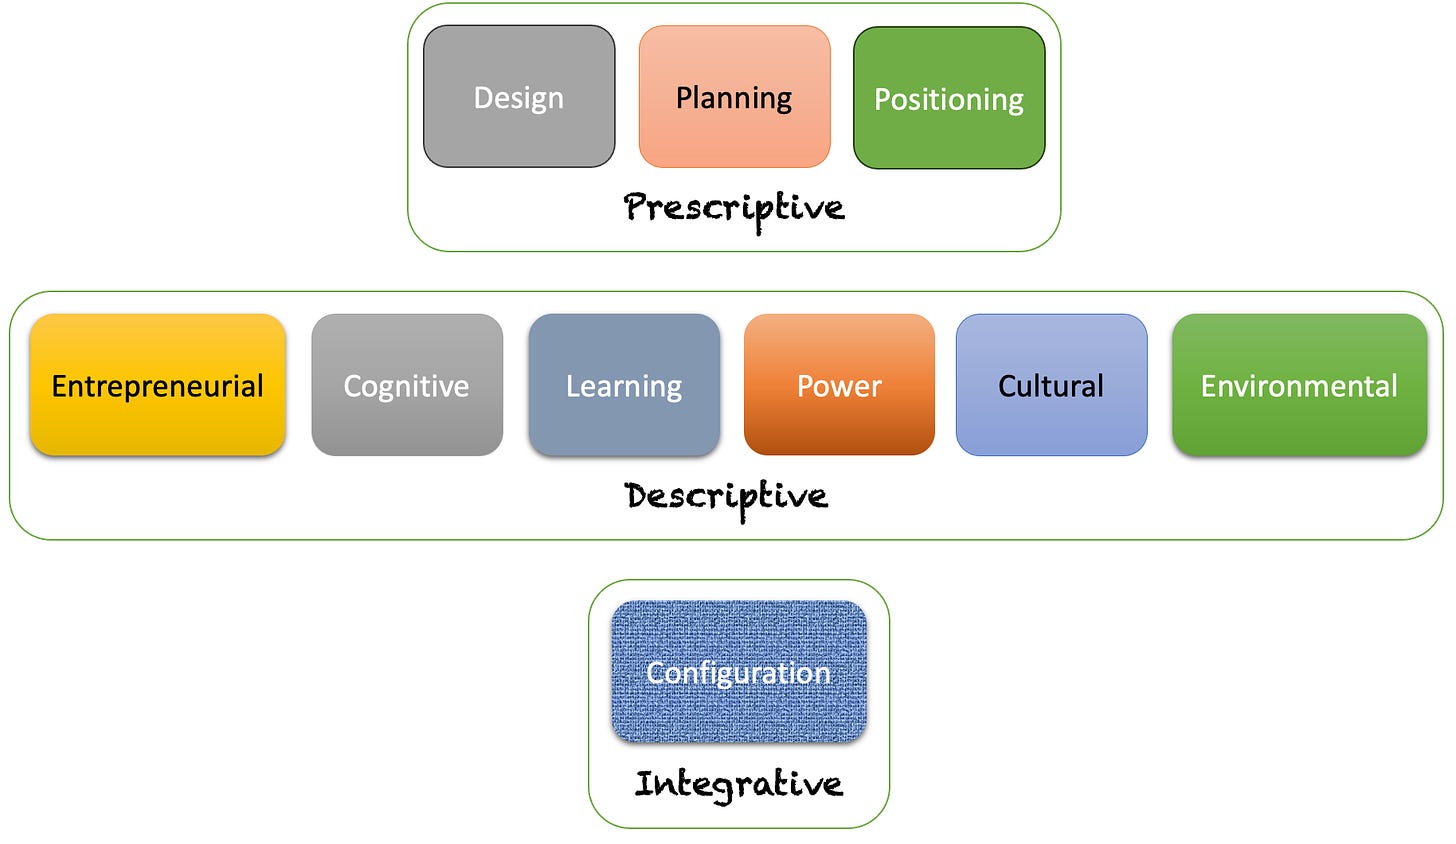 Positioning 
Entrepreneurial 
Design 
Cognitive 
Planning 
Learning 
Power 
Cultural 
Environmental 
Cgnfigura$ipn 